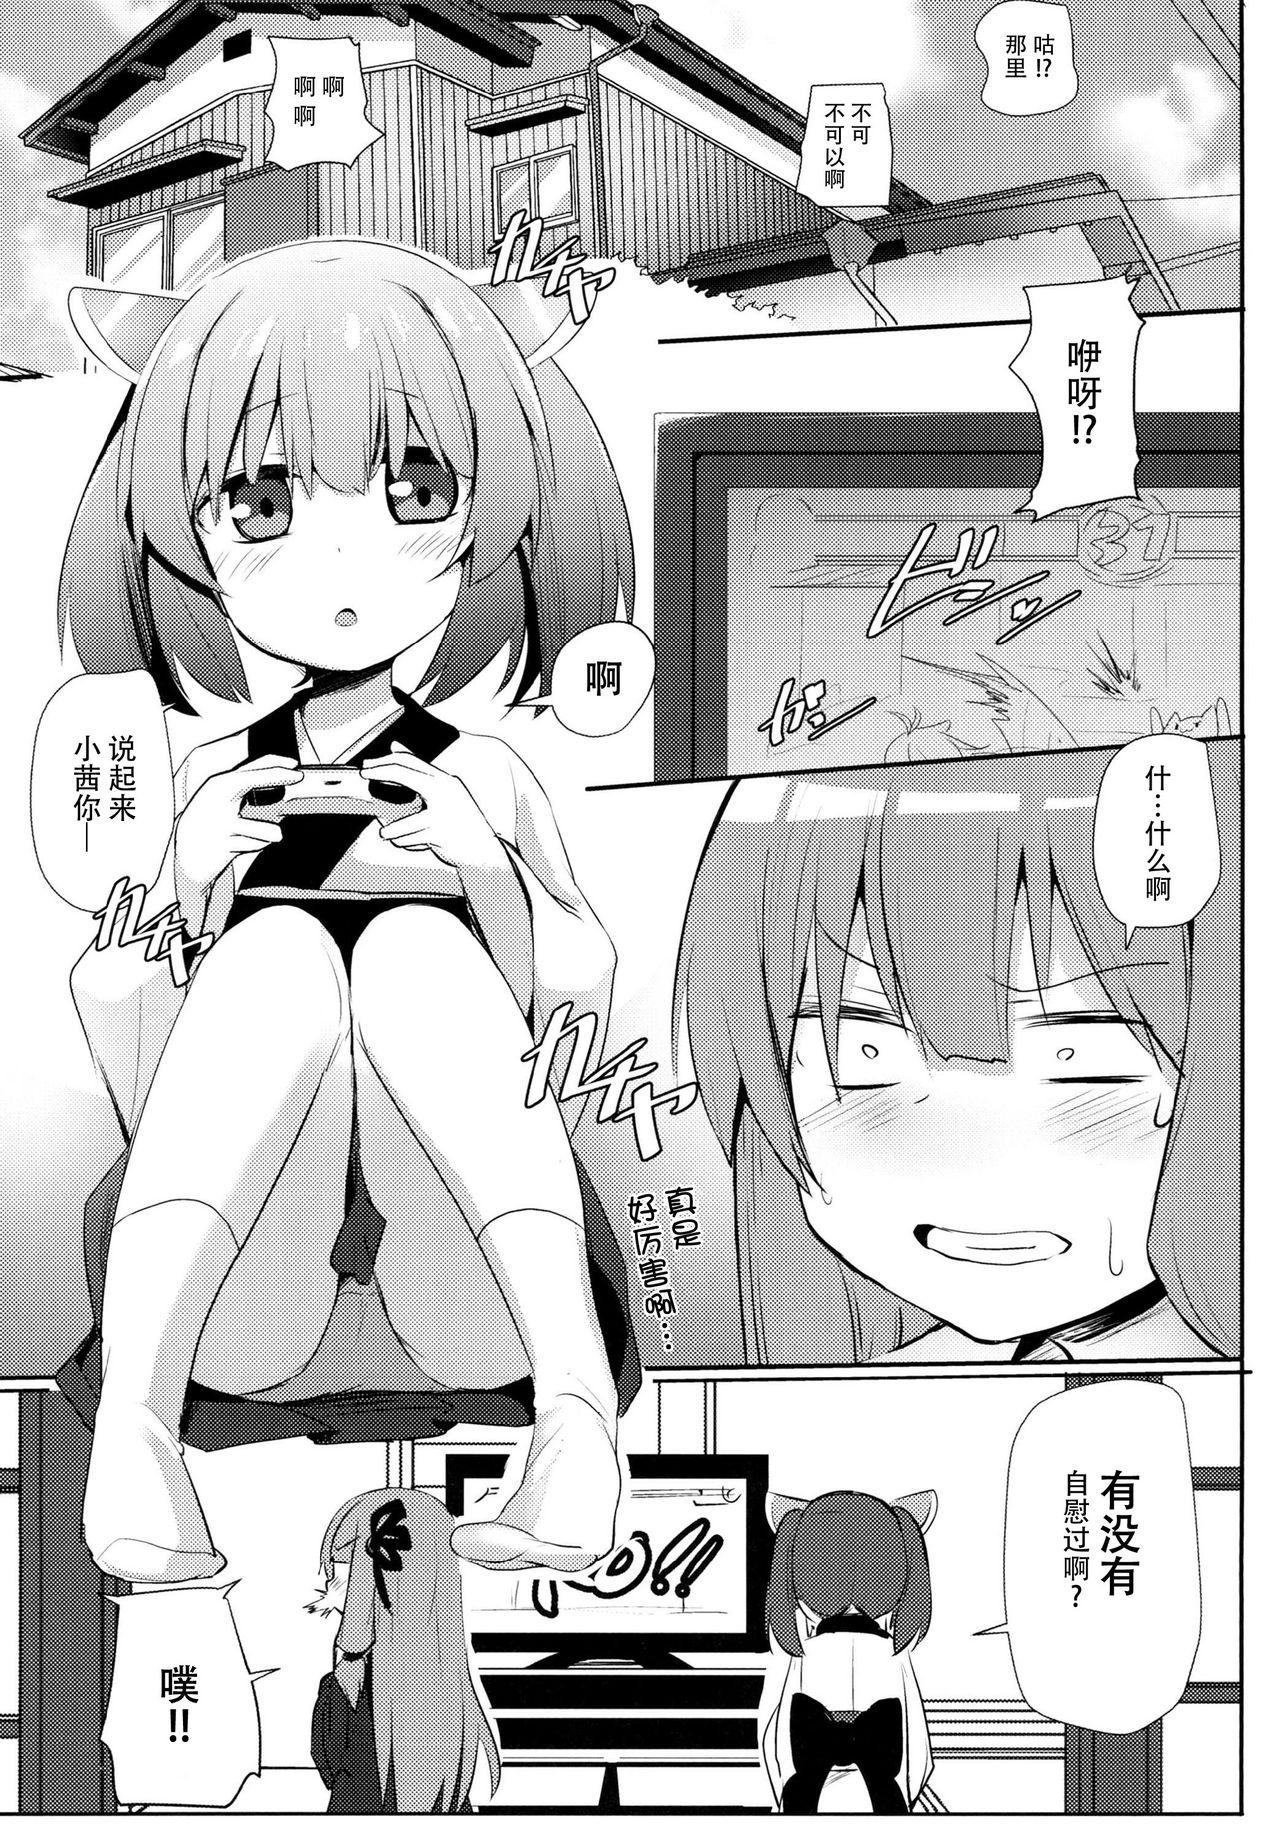 Big breasts (C93) [Milk pudding (Jamcy)] Akane-chan Challenge! 2-kaime (VOICEROID) [Chinese] [脸肿汉化组] - Voiceroid Closeup - Page 4